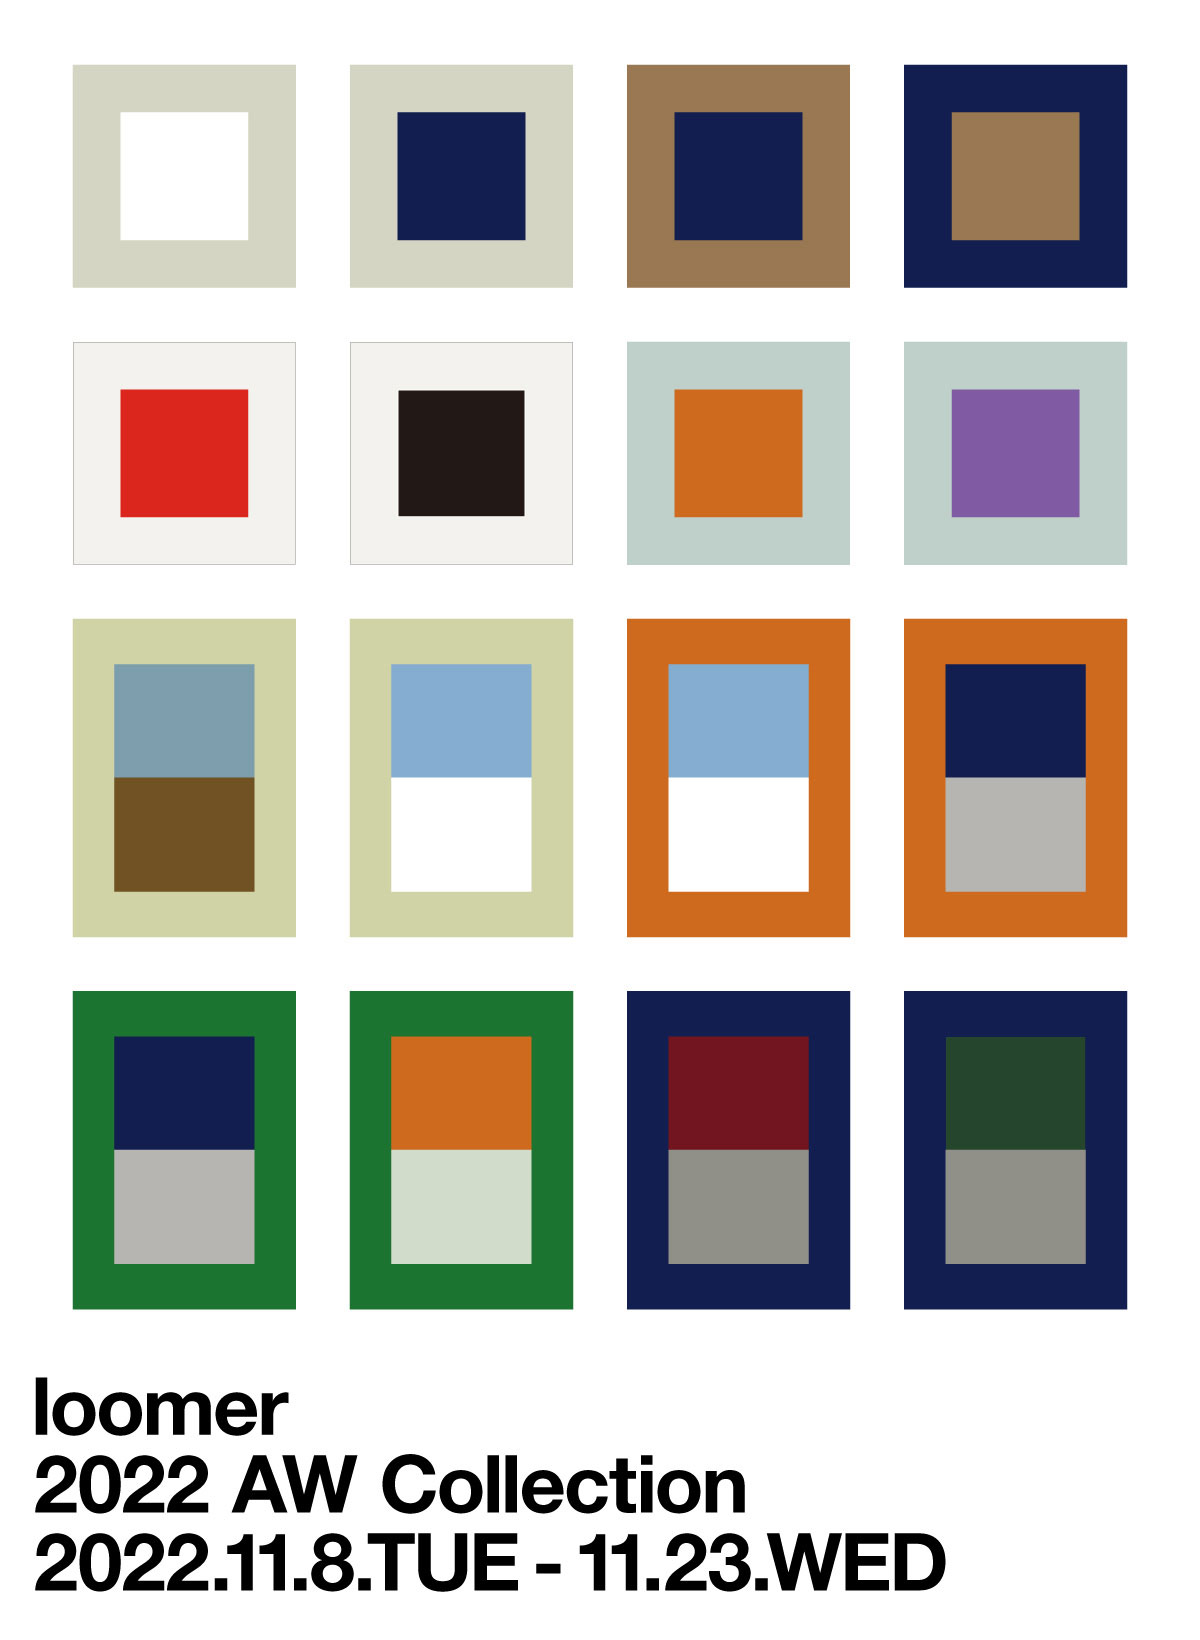 loomer 22AW collection ”